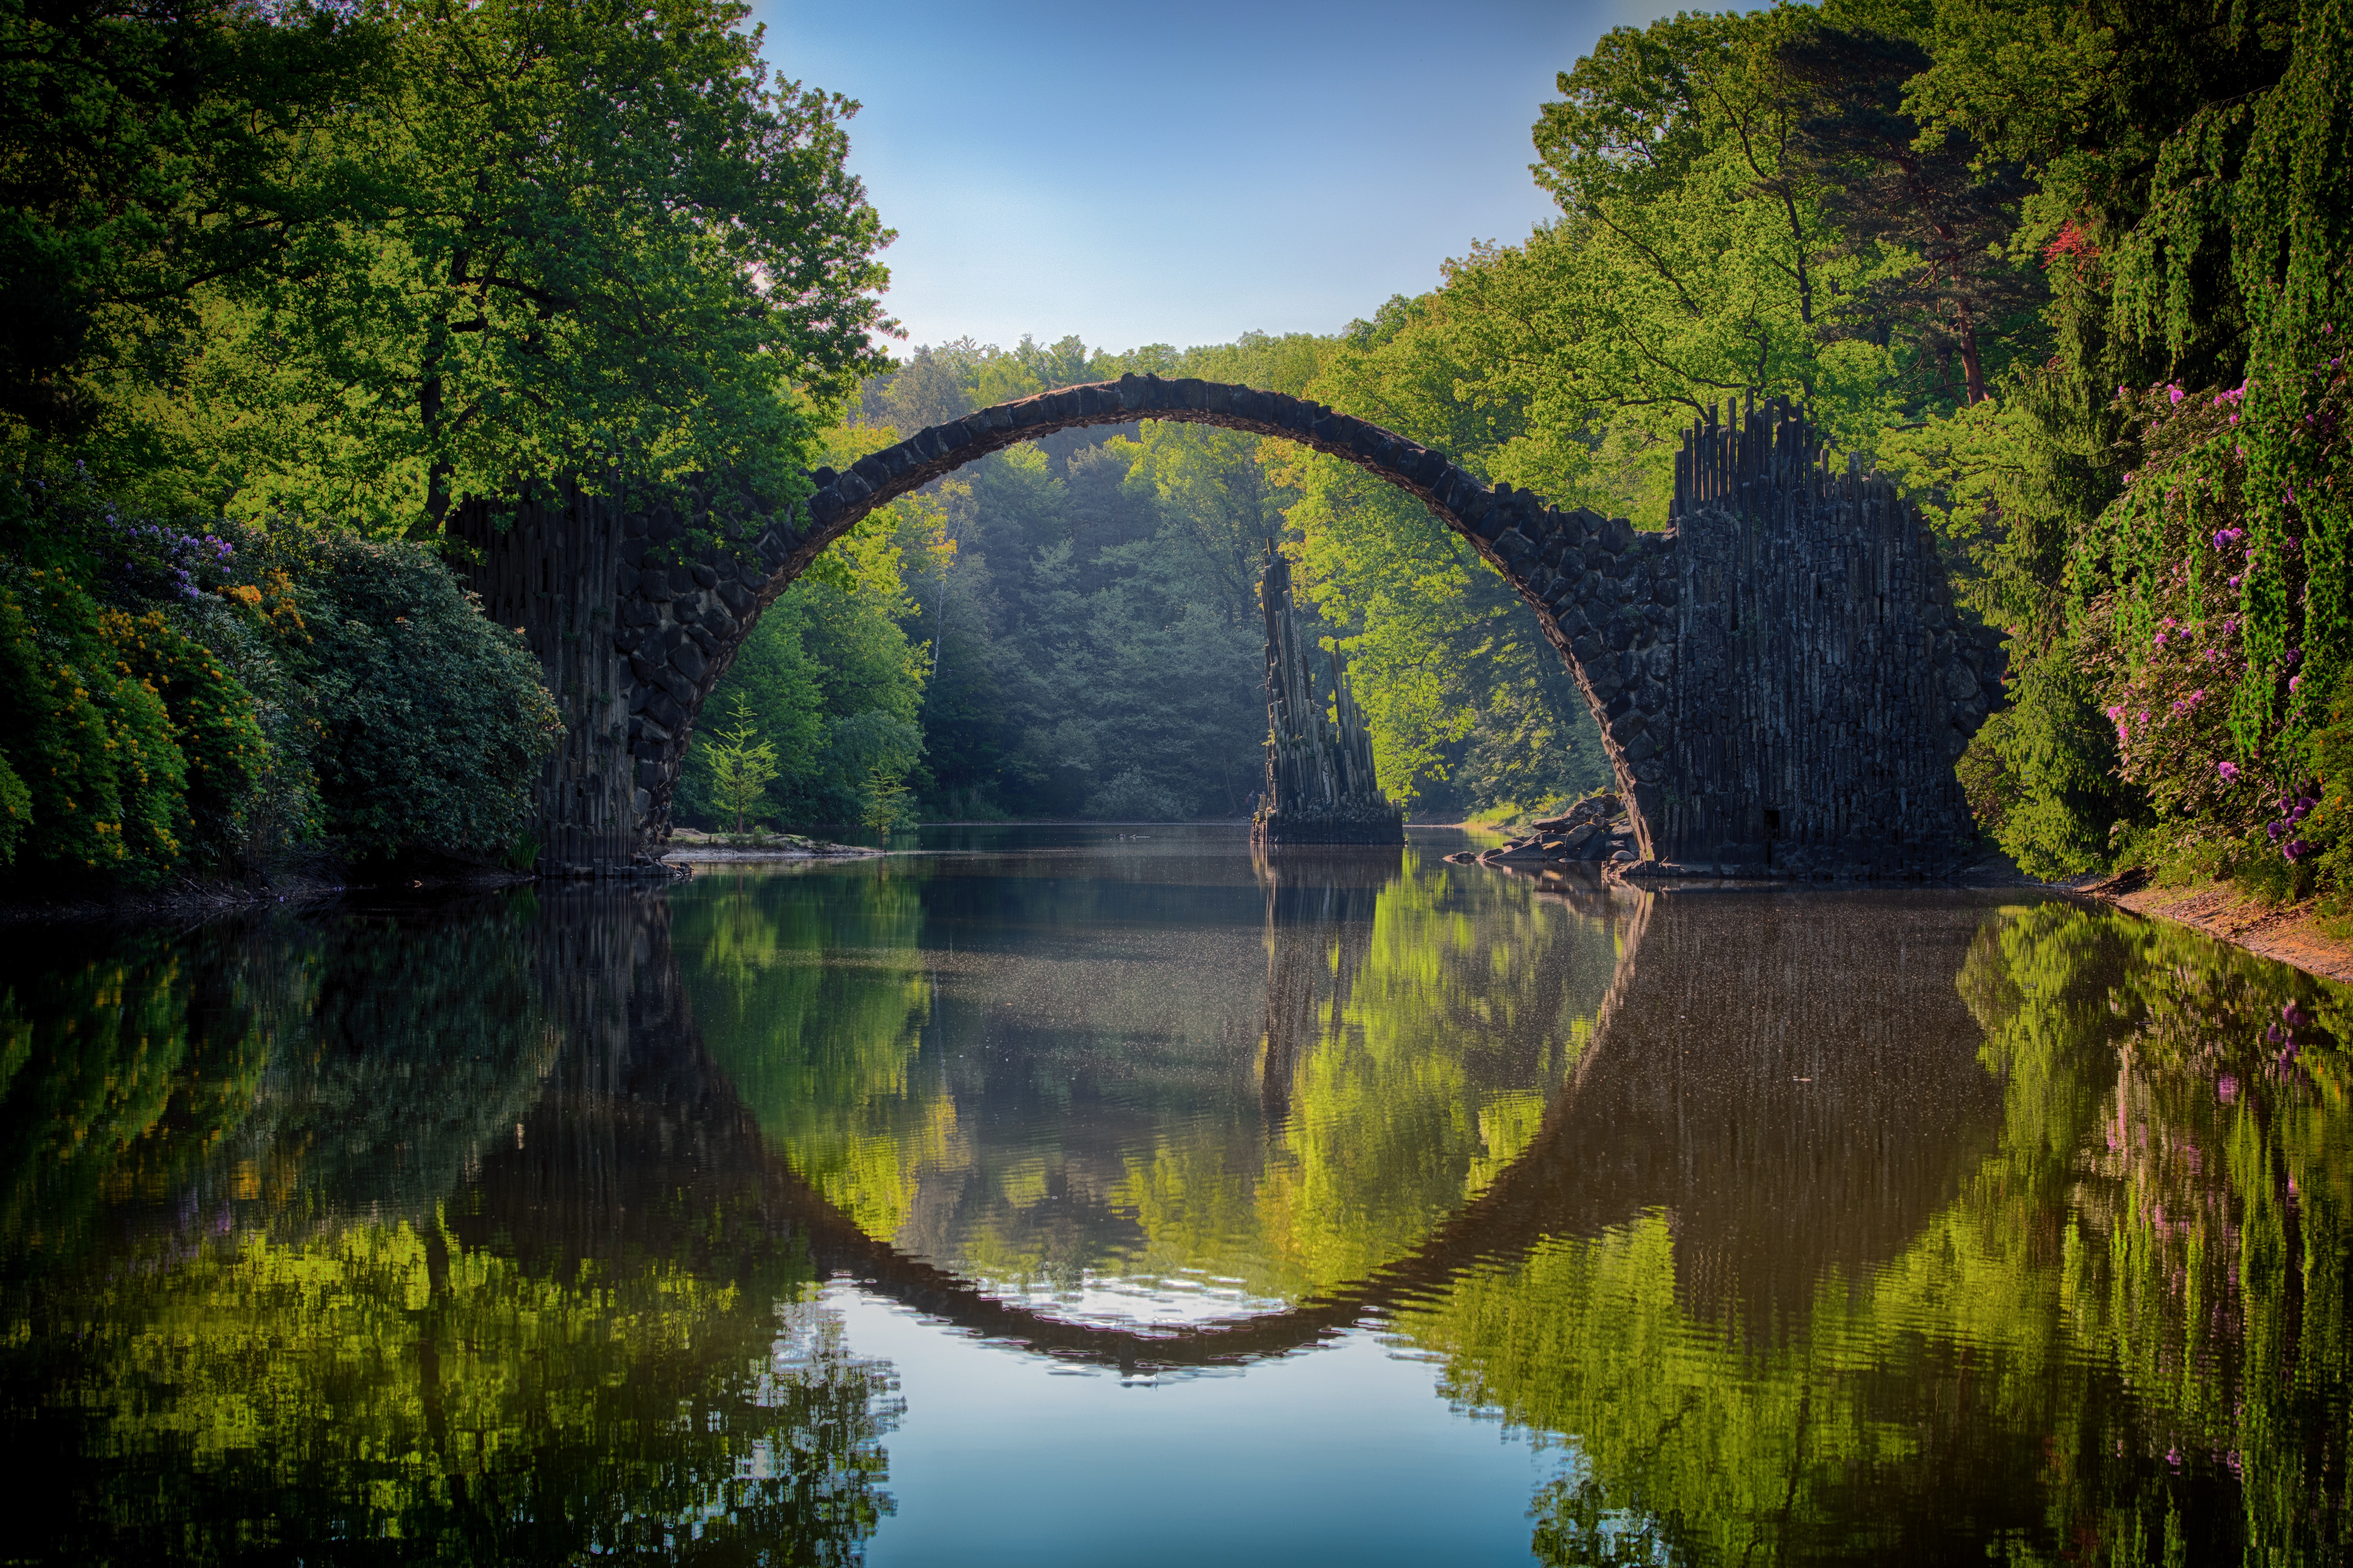 Gray Bridge and Trees, Arch, Park, Water, View, HQ Photo